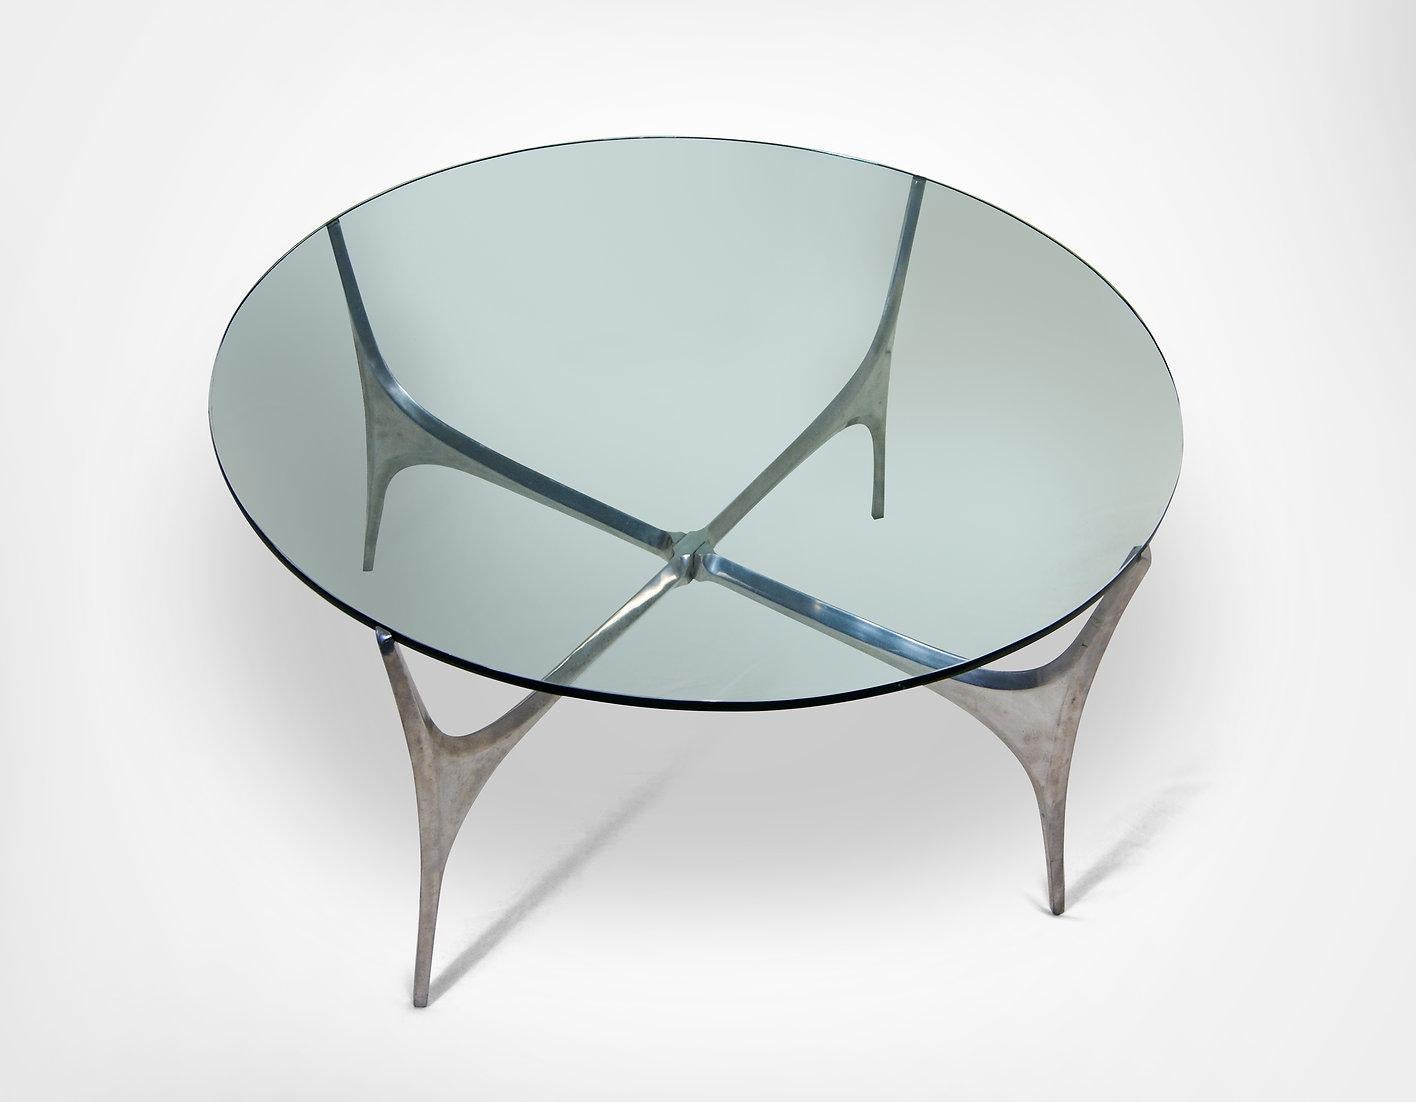 Glass and steel sculptural coffee table designed by Knut Hesterberg for Ronald Schmitt, Germany, circa 1960s.
Measure: 10mm thick toughened glass, inset on a sculpted brushed aluminium base. Striking aero dynamic shaped coffee table.
The table